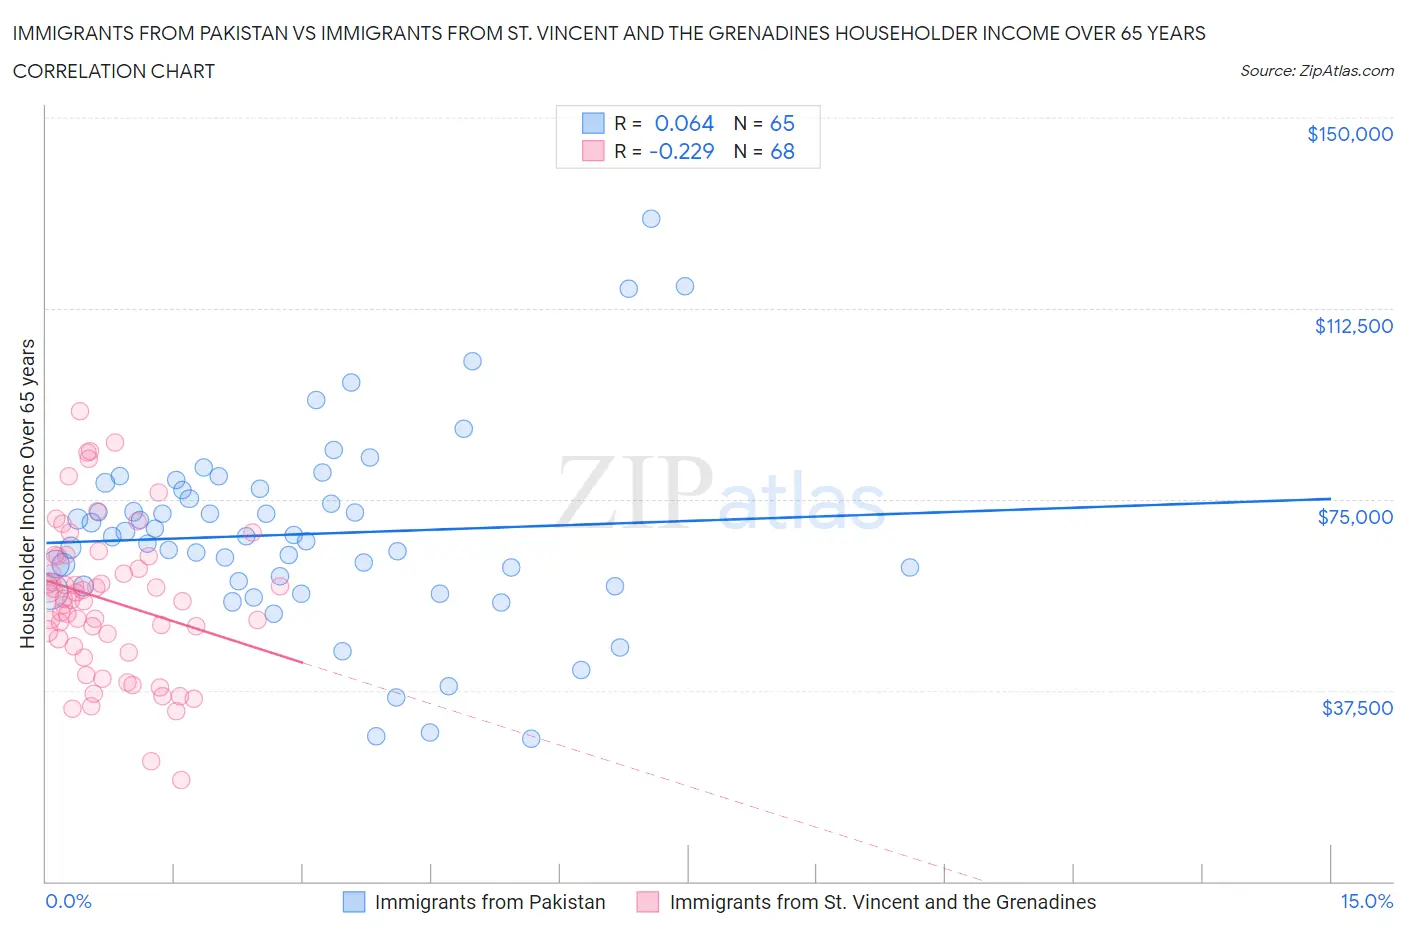 Immigrants from Pakistan vs Immigrants from St. Vincent and the Grenadines Householder Income Over 65 years